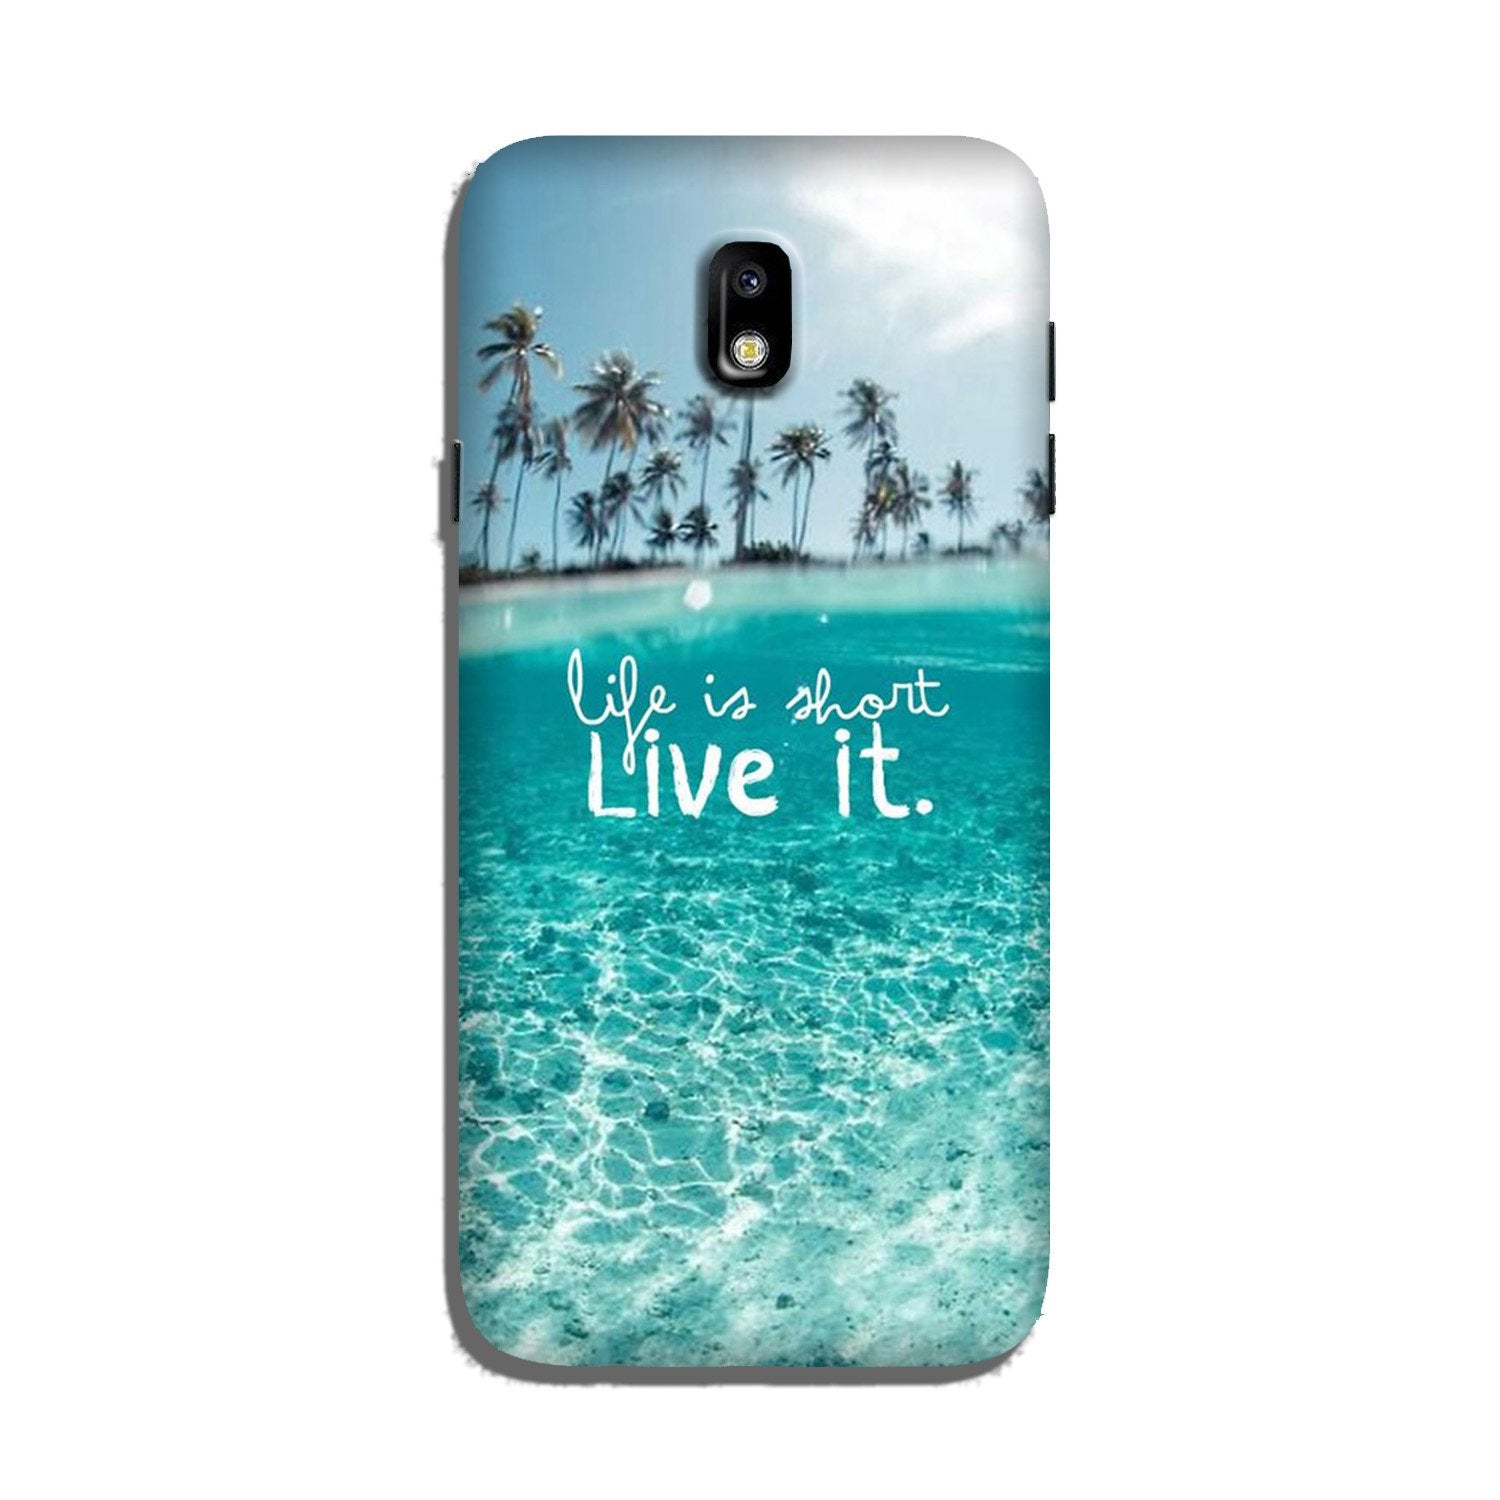 Life is short live it Case for Galaxy J3 Pro